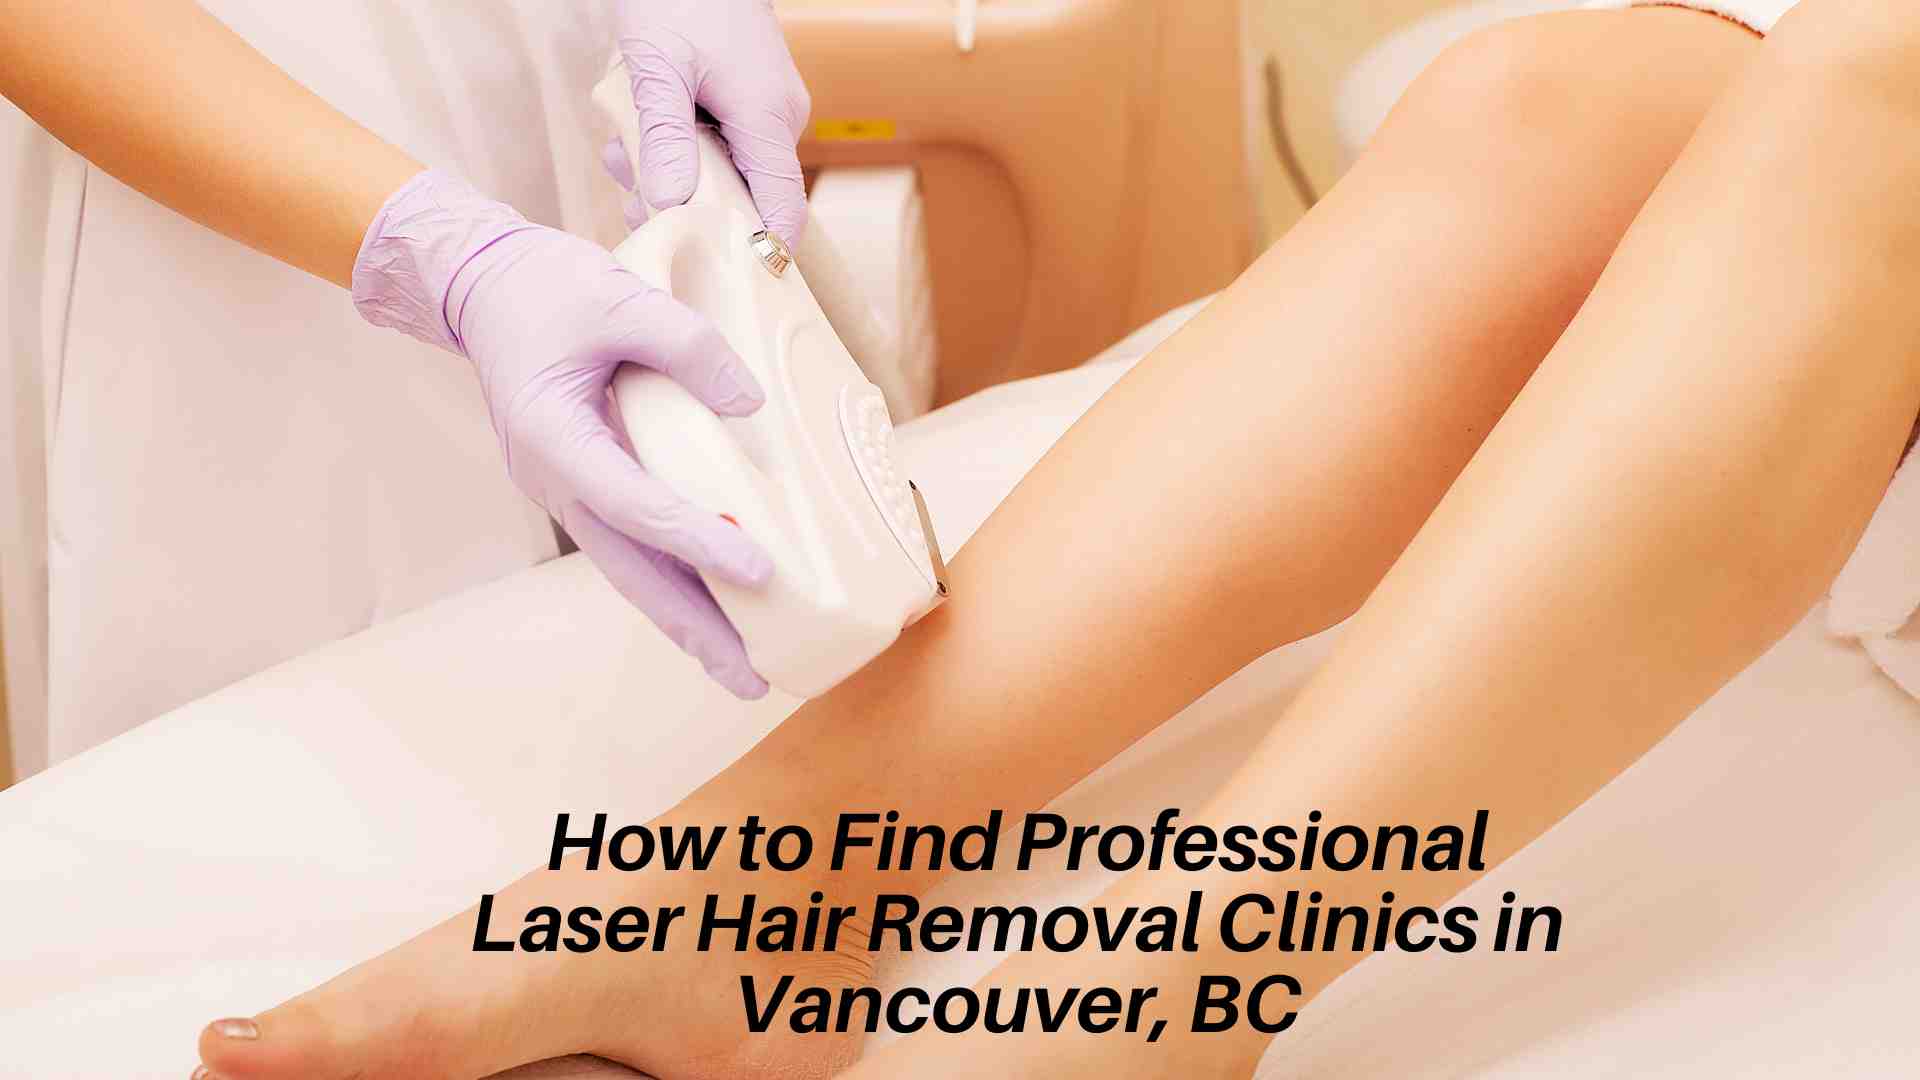 How to Find a Professional Laser Hair Removal Clinic in Vancouver, BC